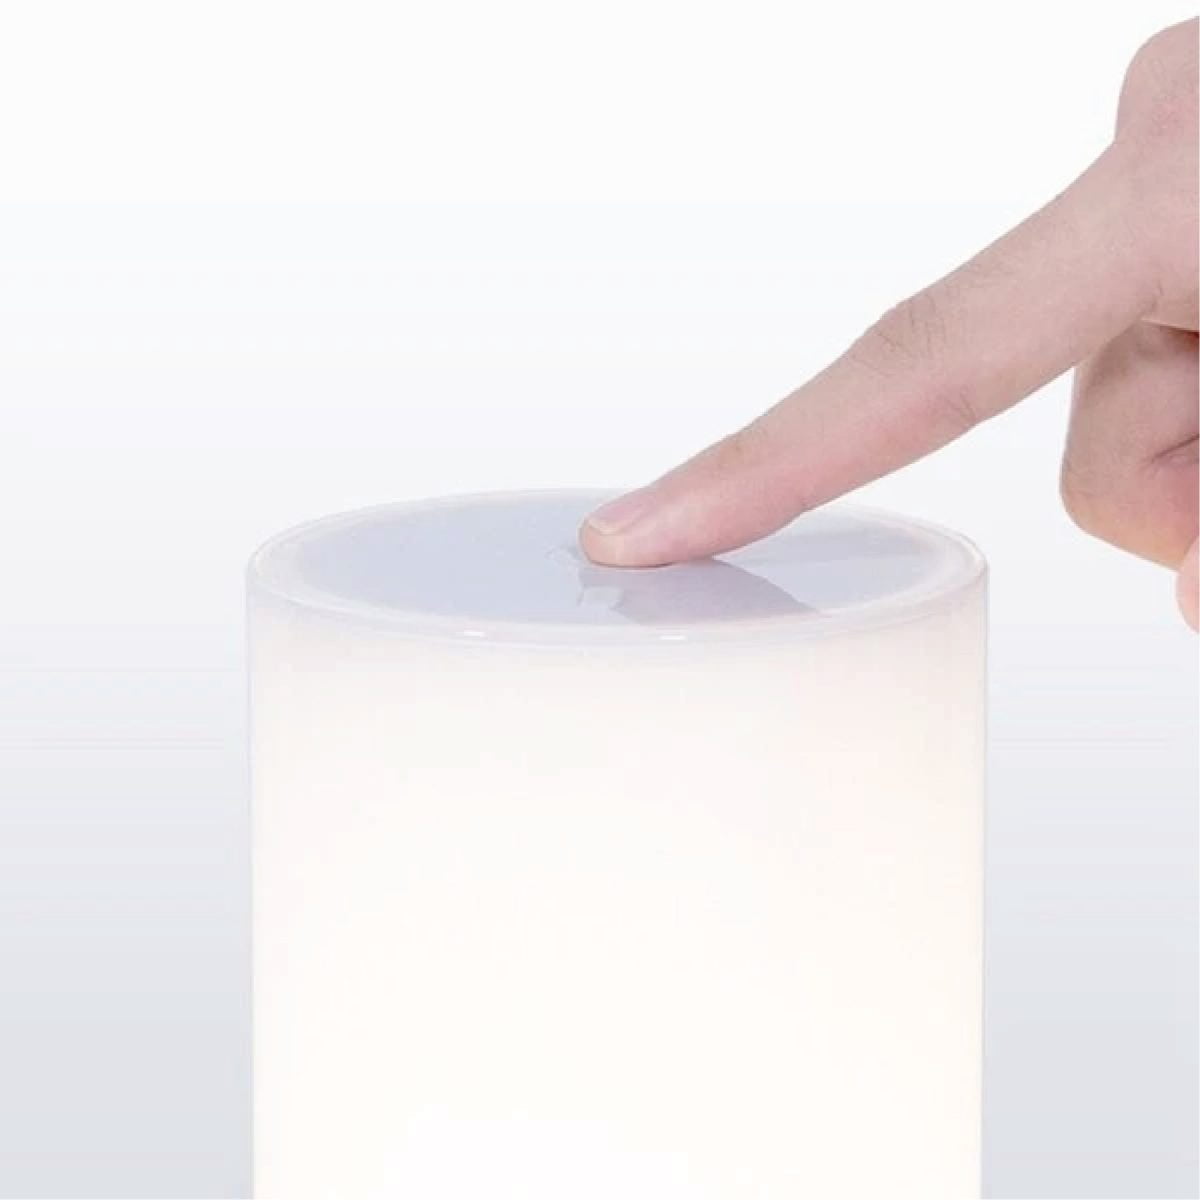 Untitled 2 04 Xiaomi Illuminate Your Home With These Energy-Efficient Bulbs. High Efficient Reflector Provides Excellent Brightness. It Will Suit Your Room Size And Décor. Help Save Energy [Embed]Https://Www.youtube.com/Watch?V=Rkk-Hf64Ihe[/Embed] Mi Bedside Lamp Mi Bedside Lamp (Mjctd01Yl) Led Bluetooth Wifi Control